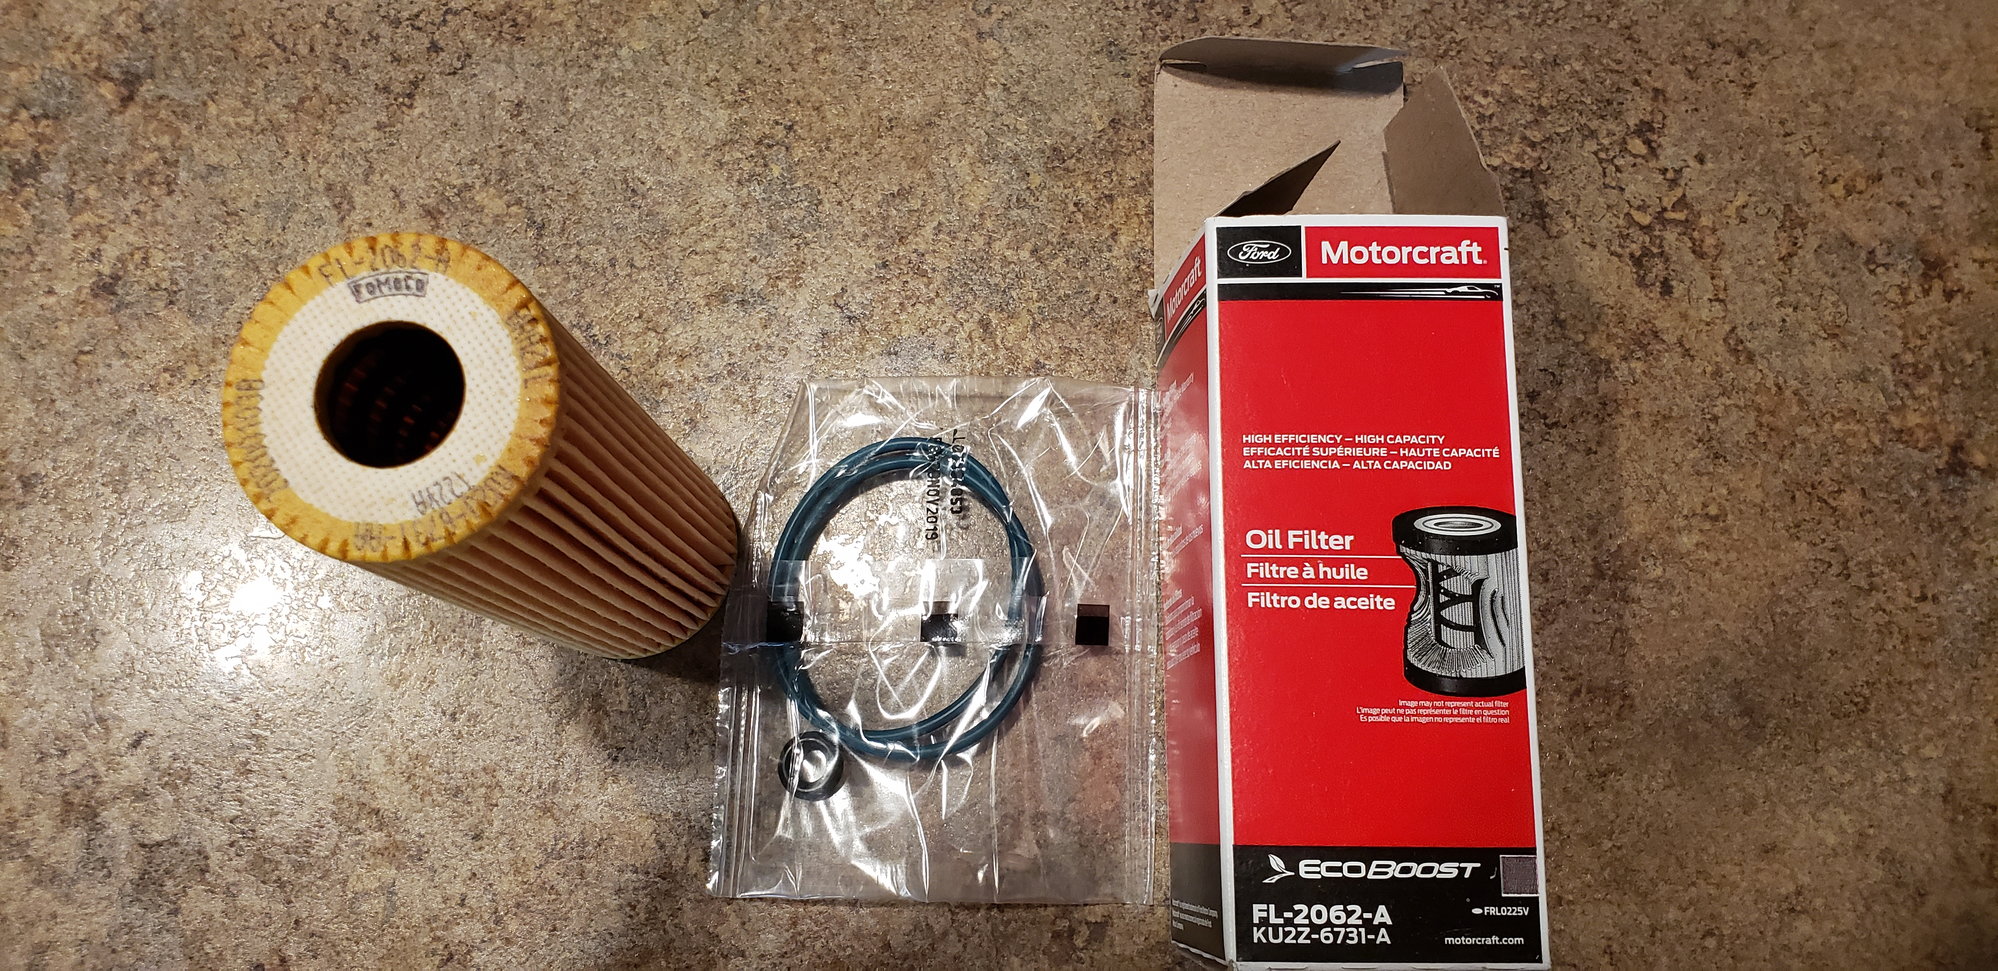 Motorcraft oil filter upgrade - Ford F150 Forum - Community of Ford Truck Fans 2013 Ford F150 3.5 Ecoboost Oil Filter